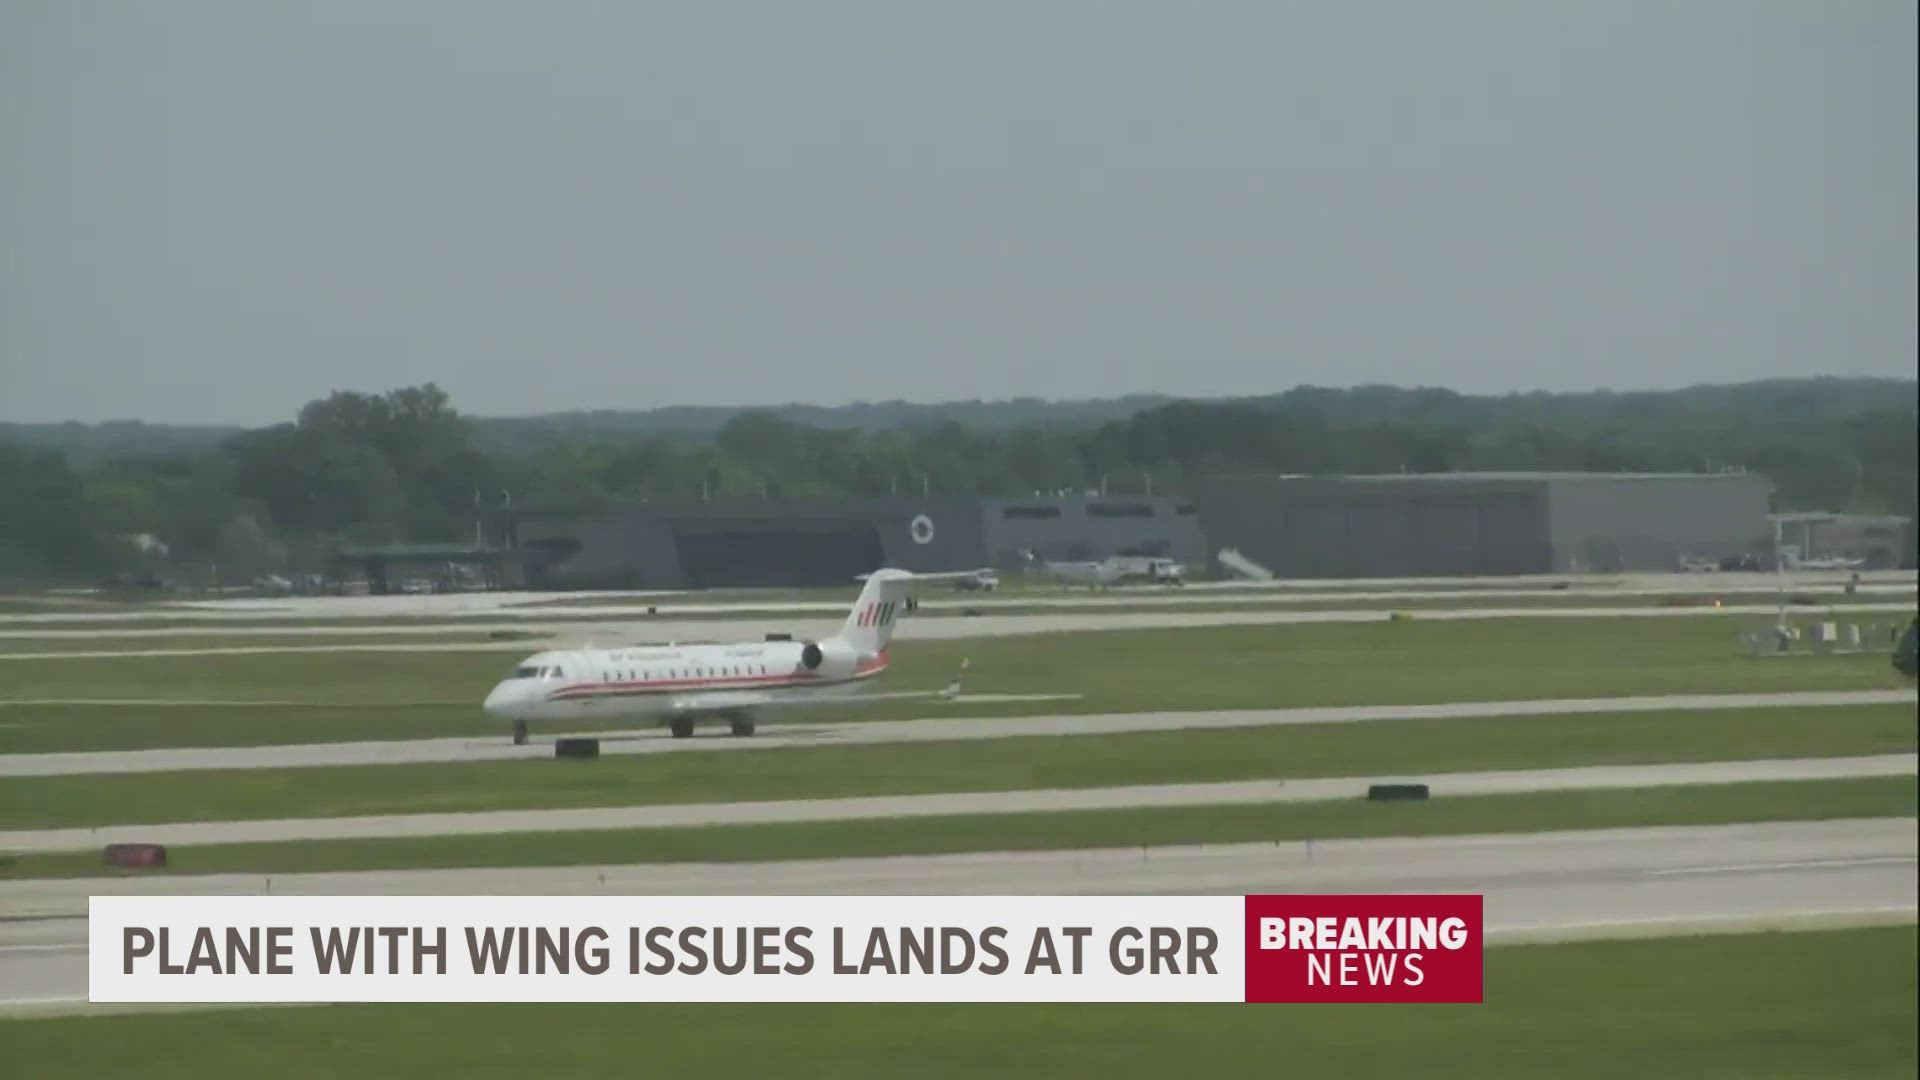 The flight was able to land safely at Gerald R. Ford Airport Friday morning.